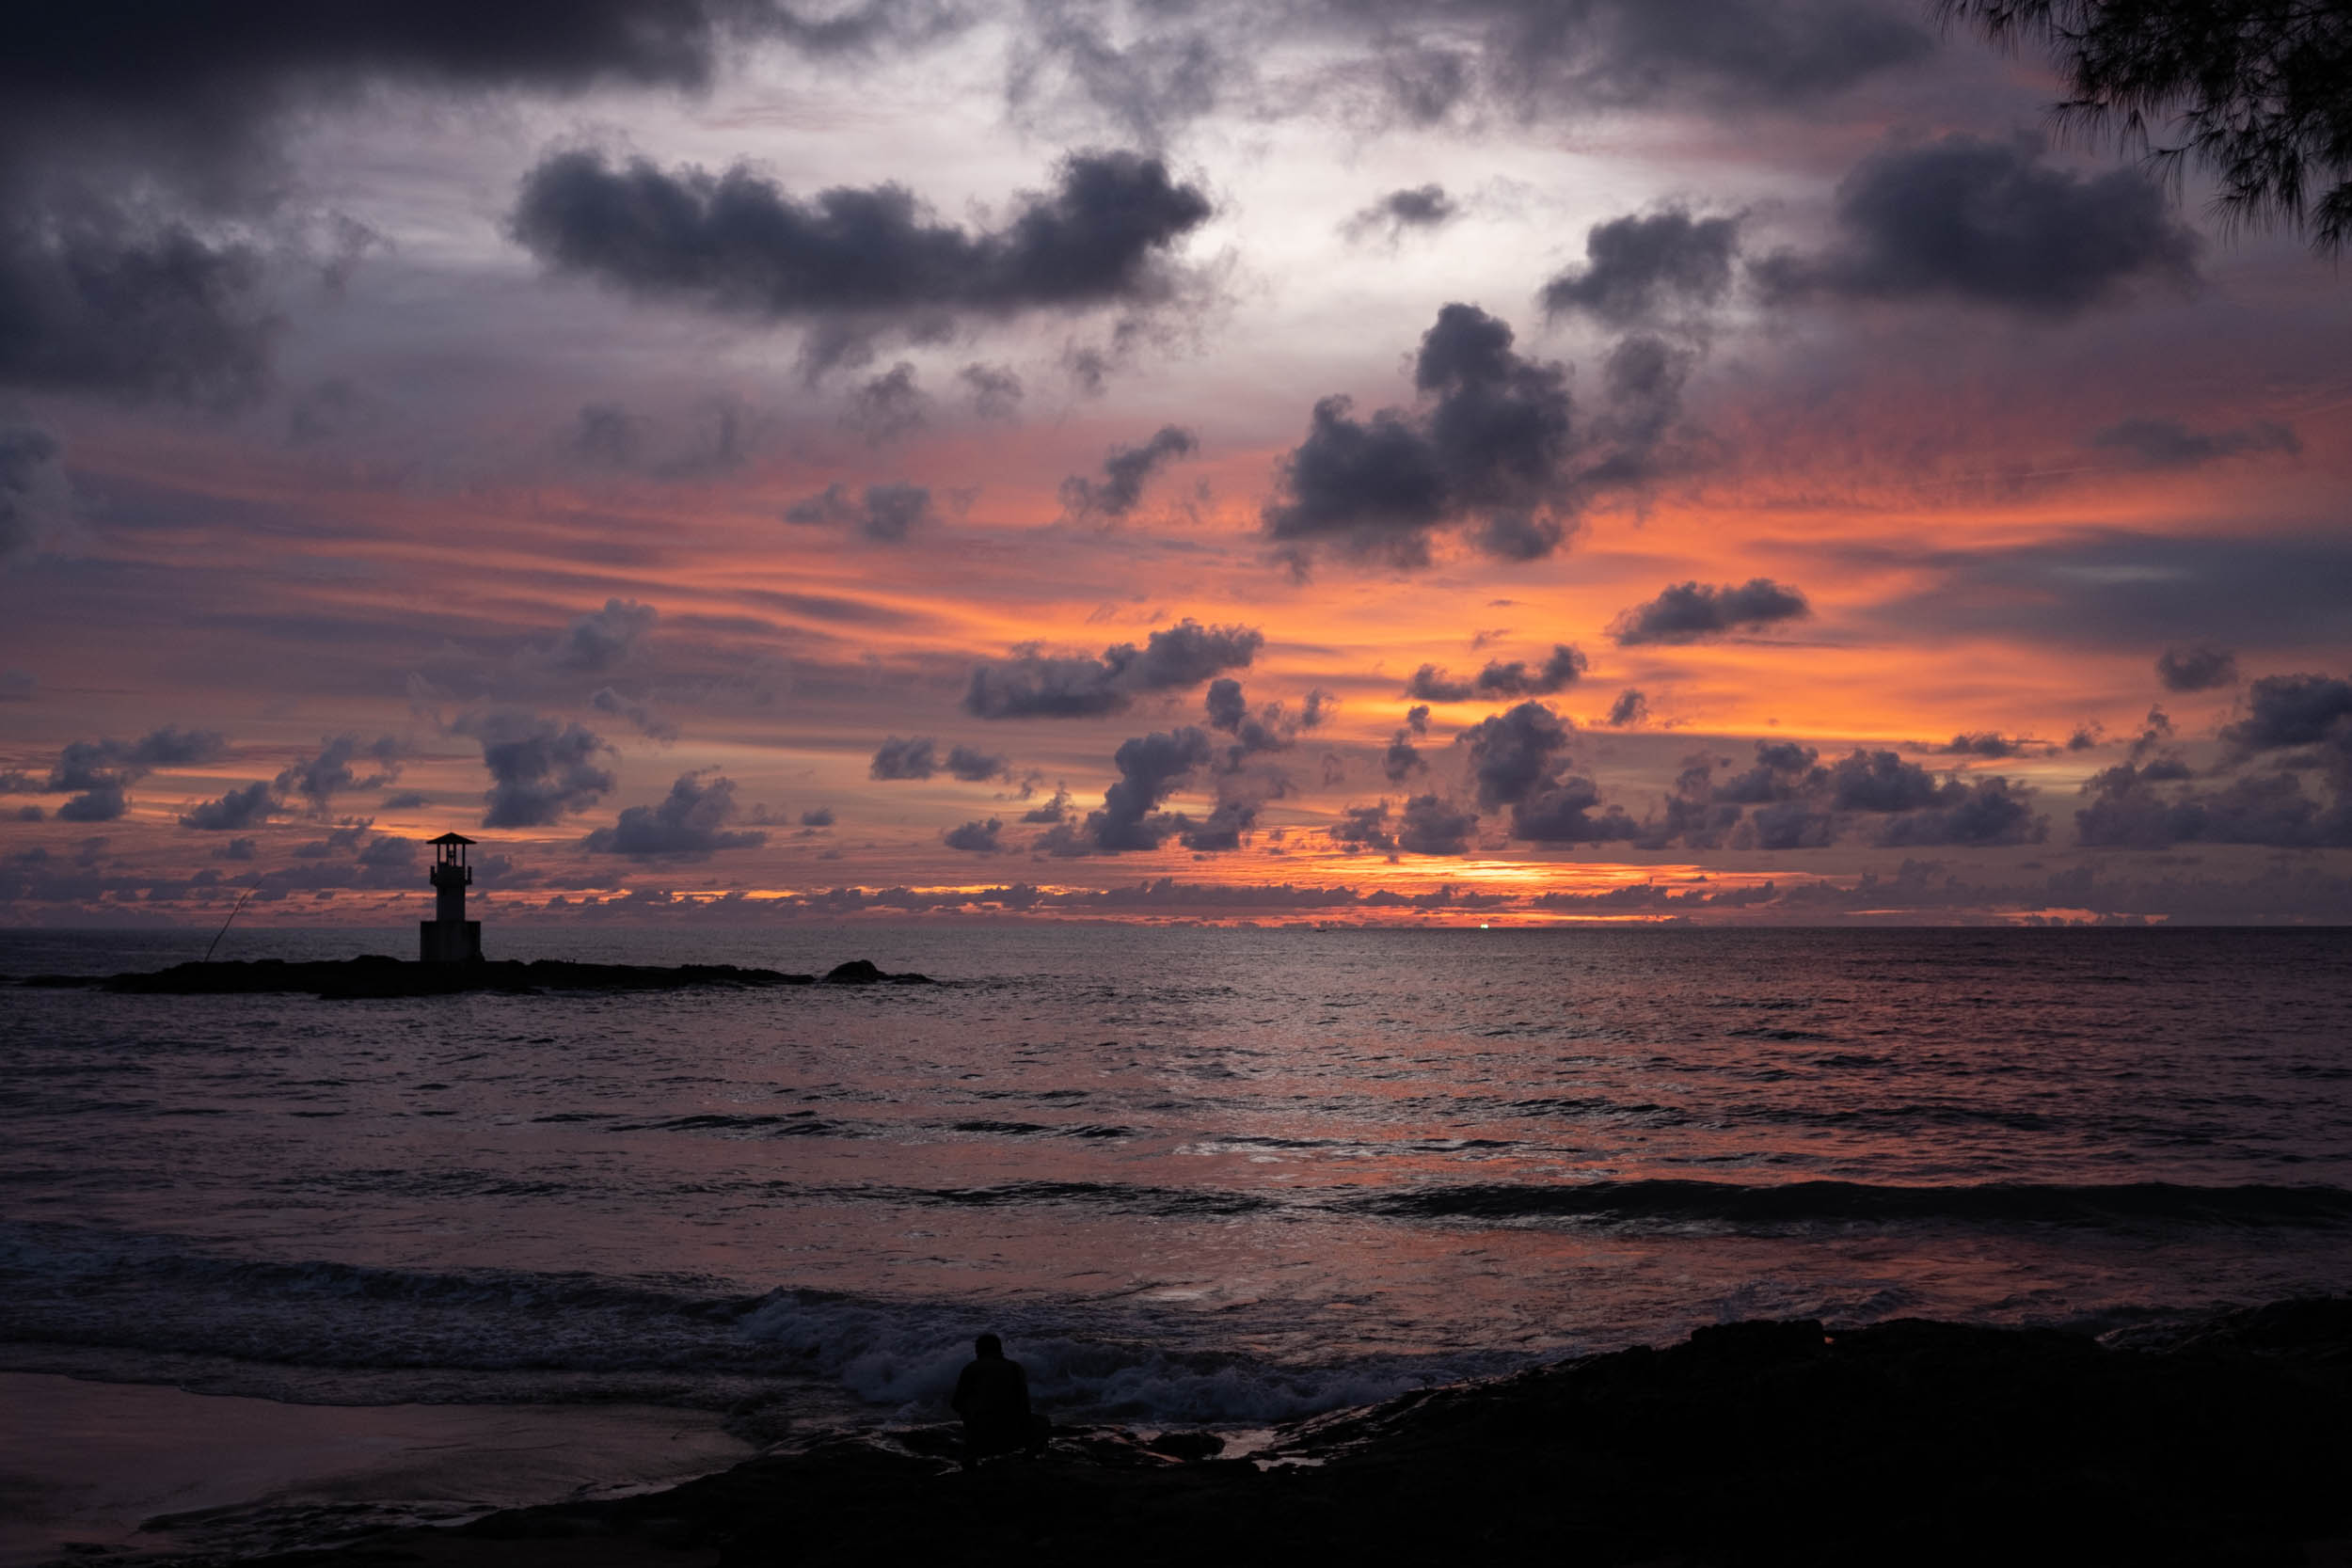 A beautiful sunset at Nang Thong beach, Khao Lak, with a lighthouse on the left hand side.